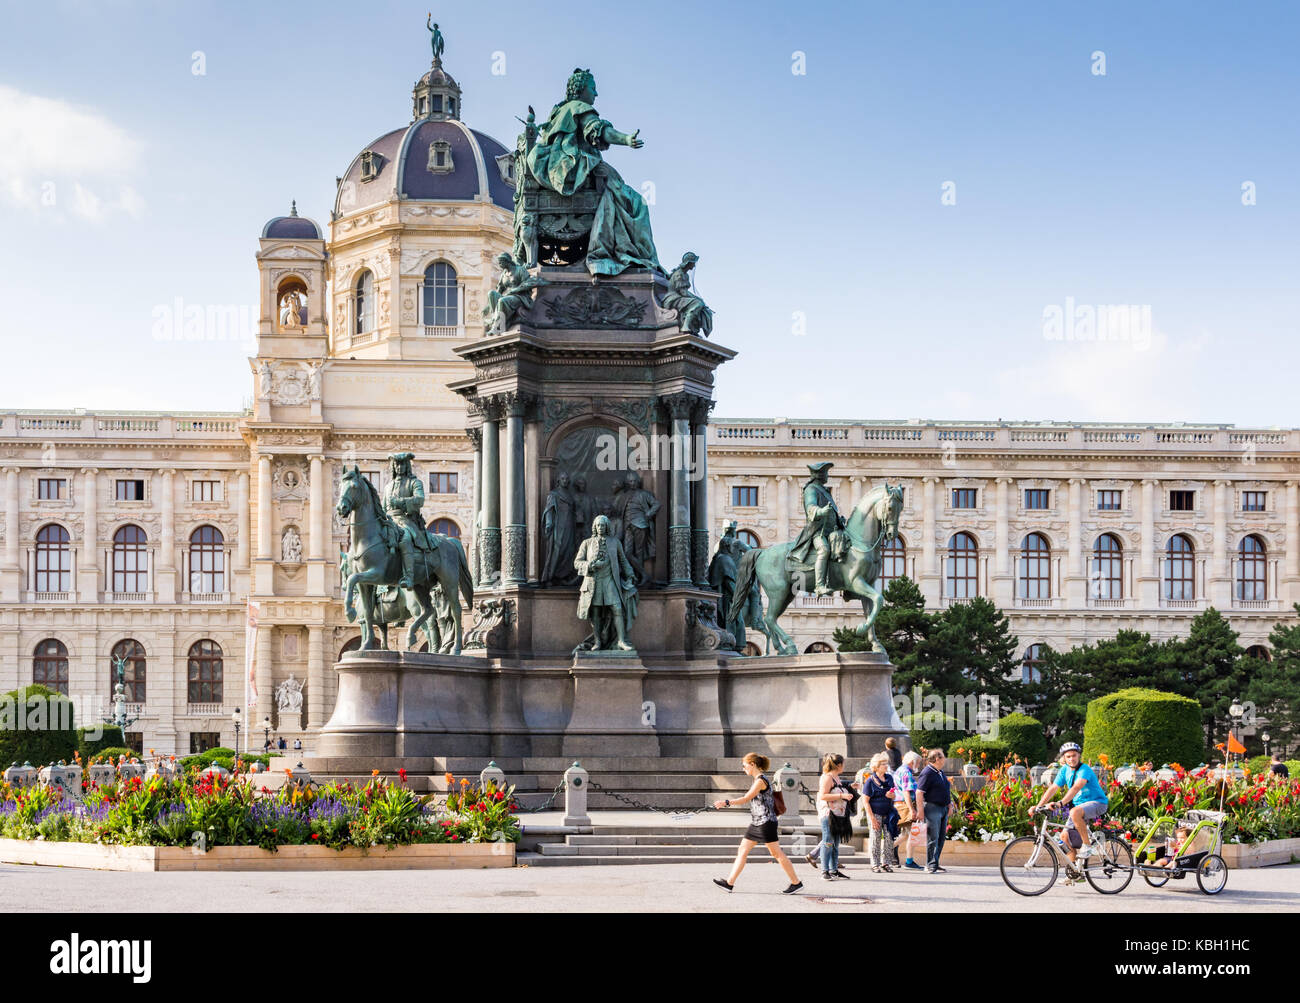 VIENNA, AUSTRIA - AUGUST 28: Tourists at the Maria Theresia monument and the natural history museum at the Maria-Theresien-Platz square in Vienna, Aus Stock Photo